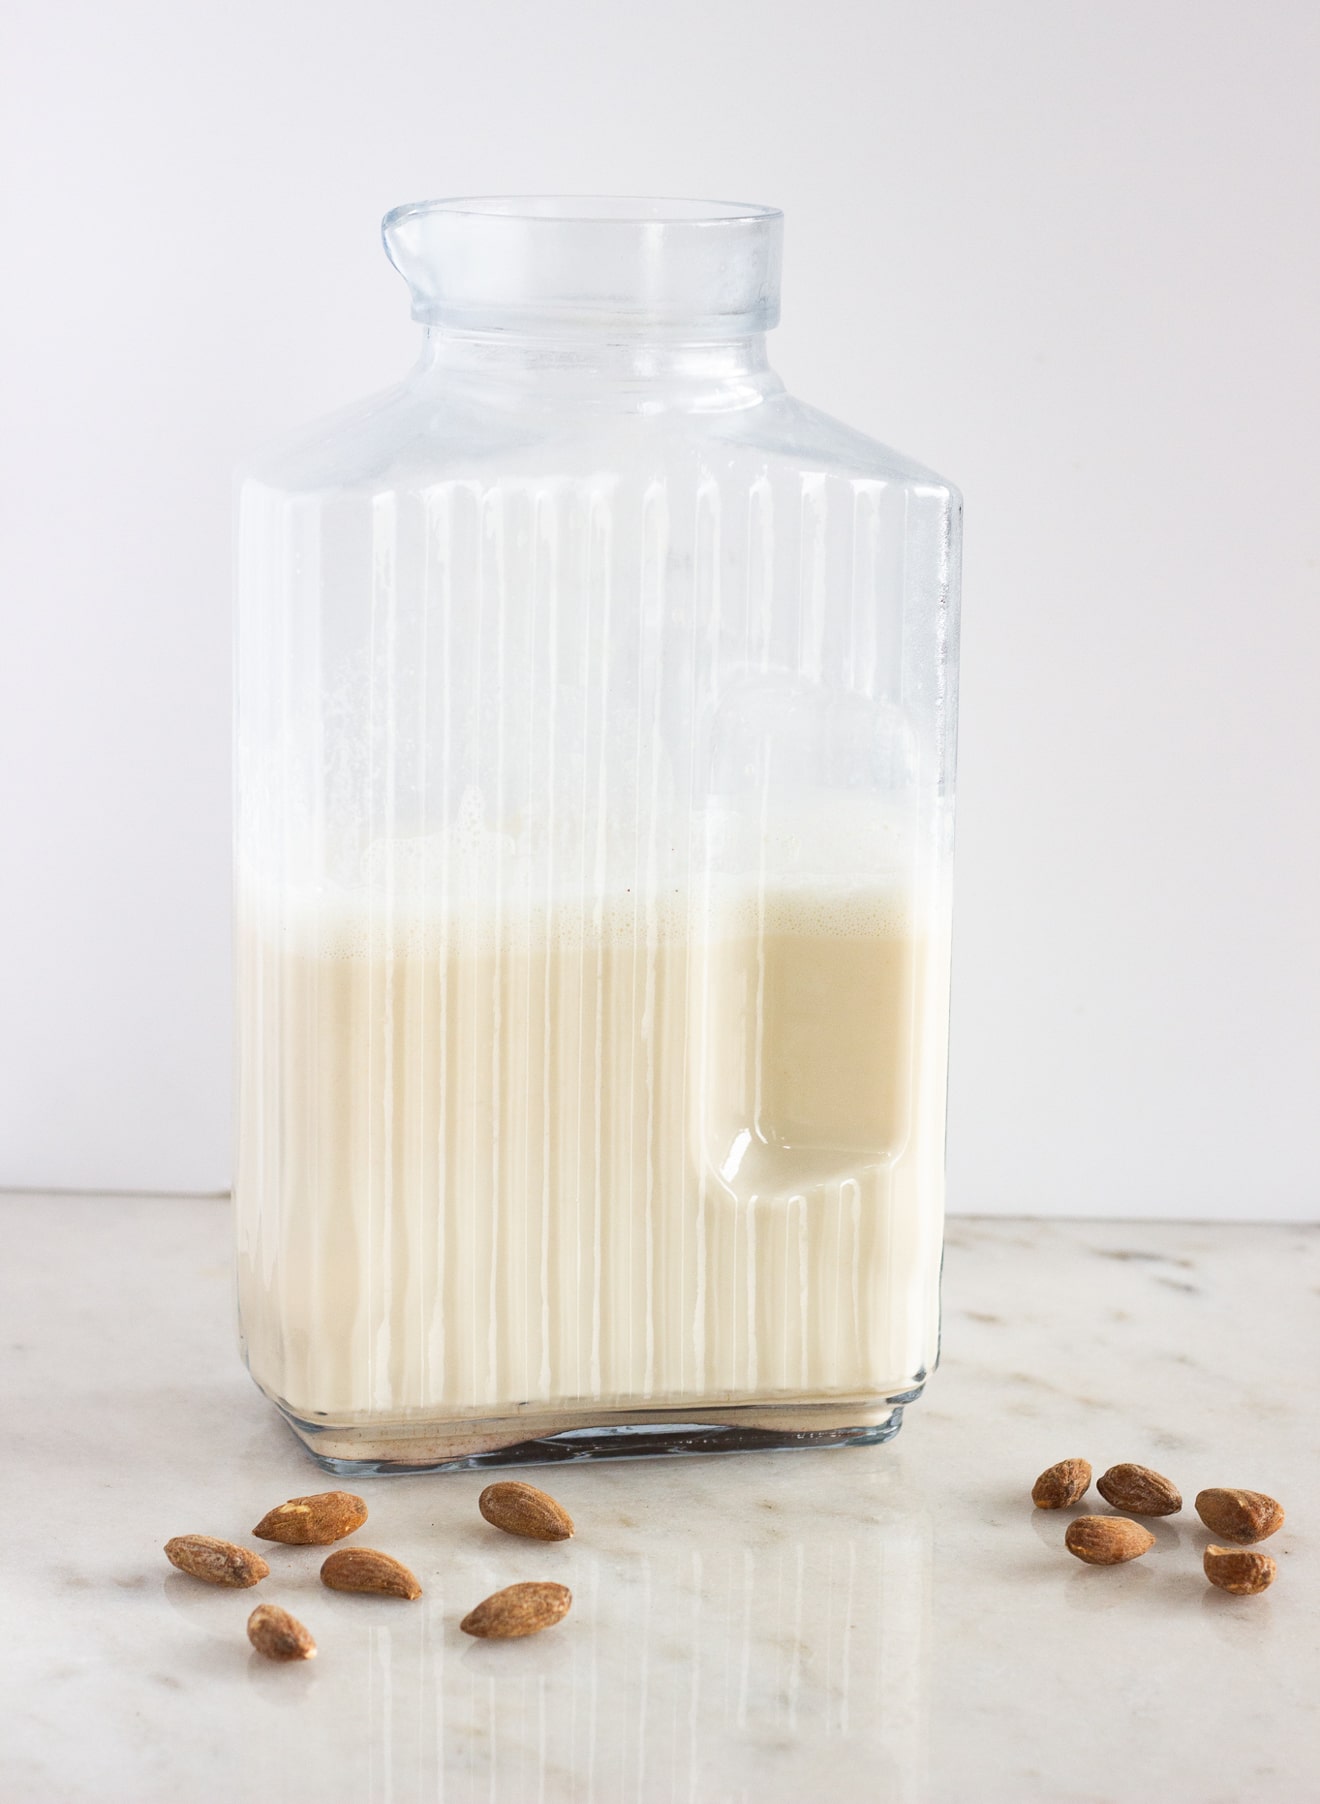 Homemade Almond Milk in a Pitcher